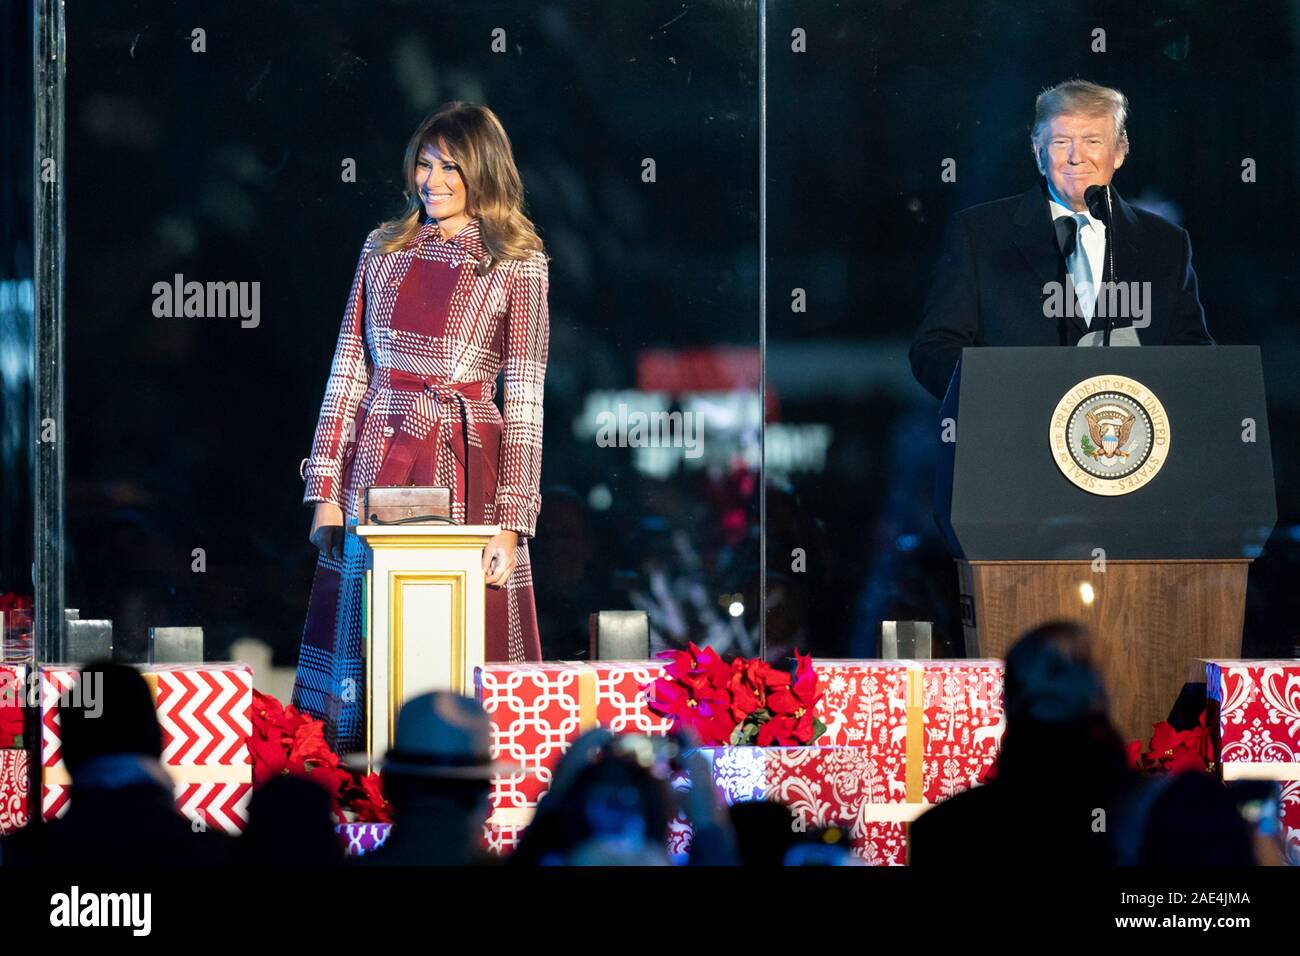 Washington DC, USA. 05 December, 2019. U.S President Donald Trump and First Lady Melania Trump during the 97th annual National Christmas Tree Lighting 2019 ceremony on the Ellipse December 5, 2019 in Washington, D.C. Credit: Andrea Hanks/White House Photo/Alamy Live News Stock Photo